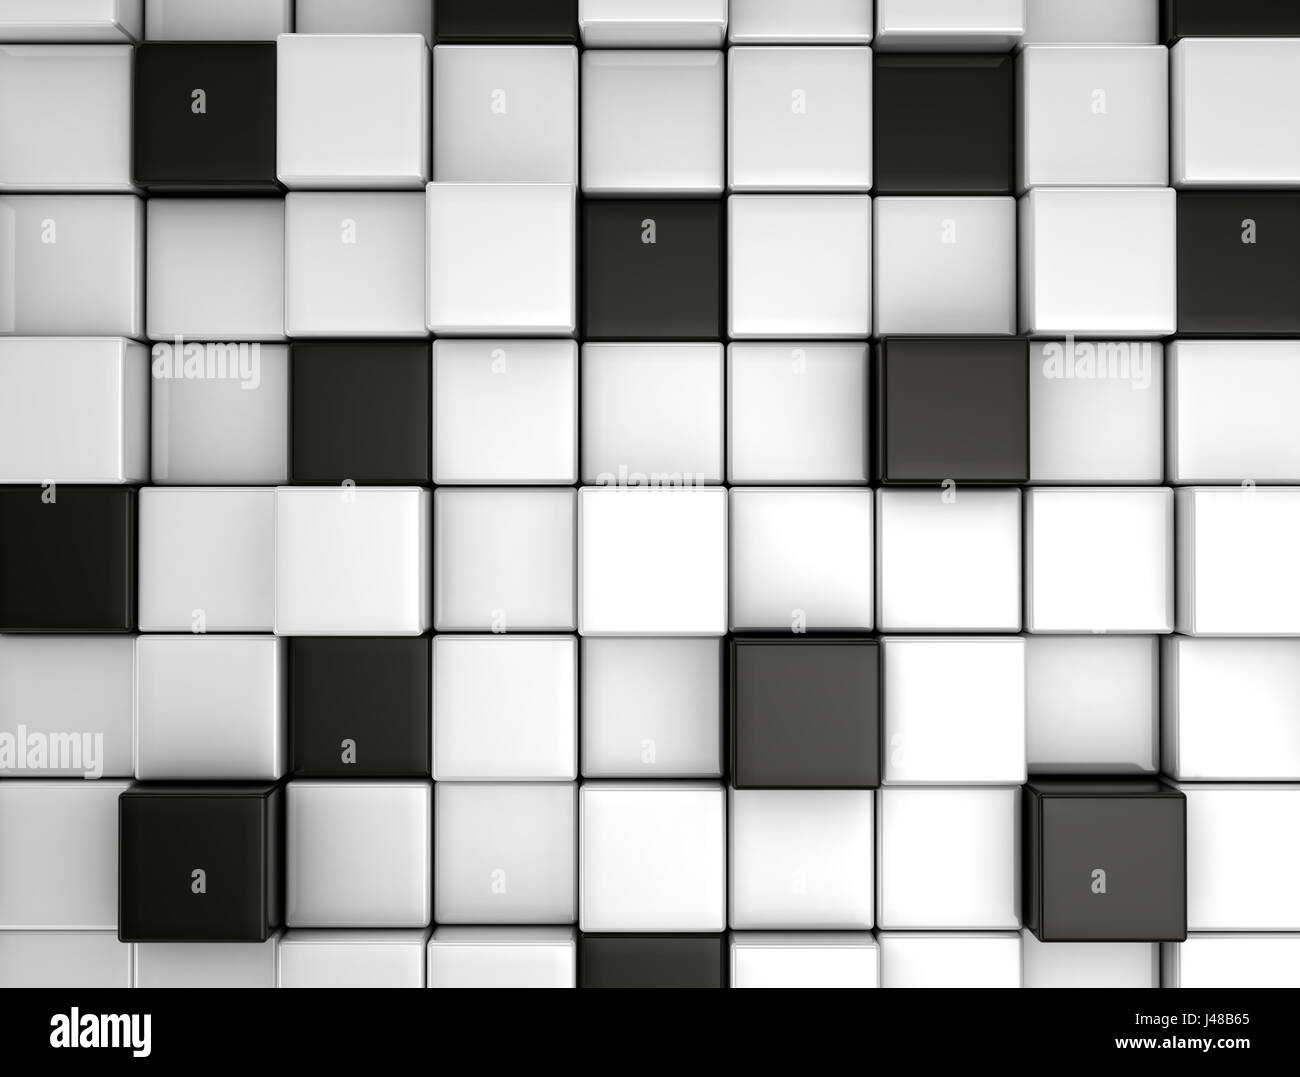 Abstract background made of black and white cubes. 3dRender Illustration Stock Photo